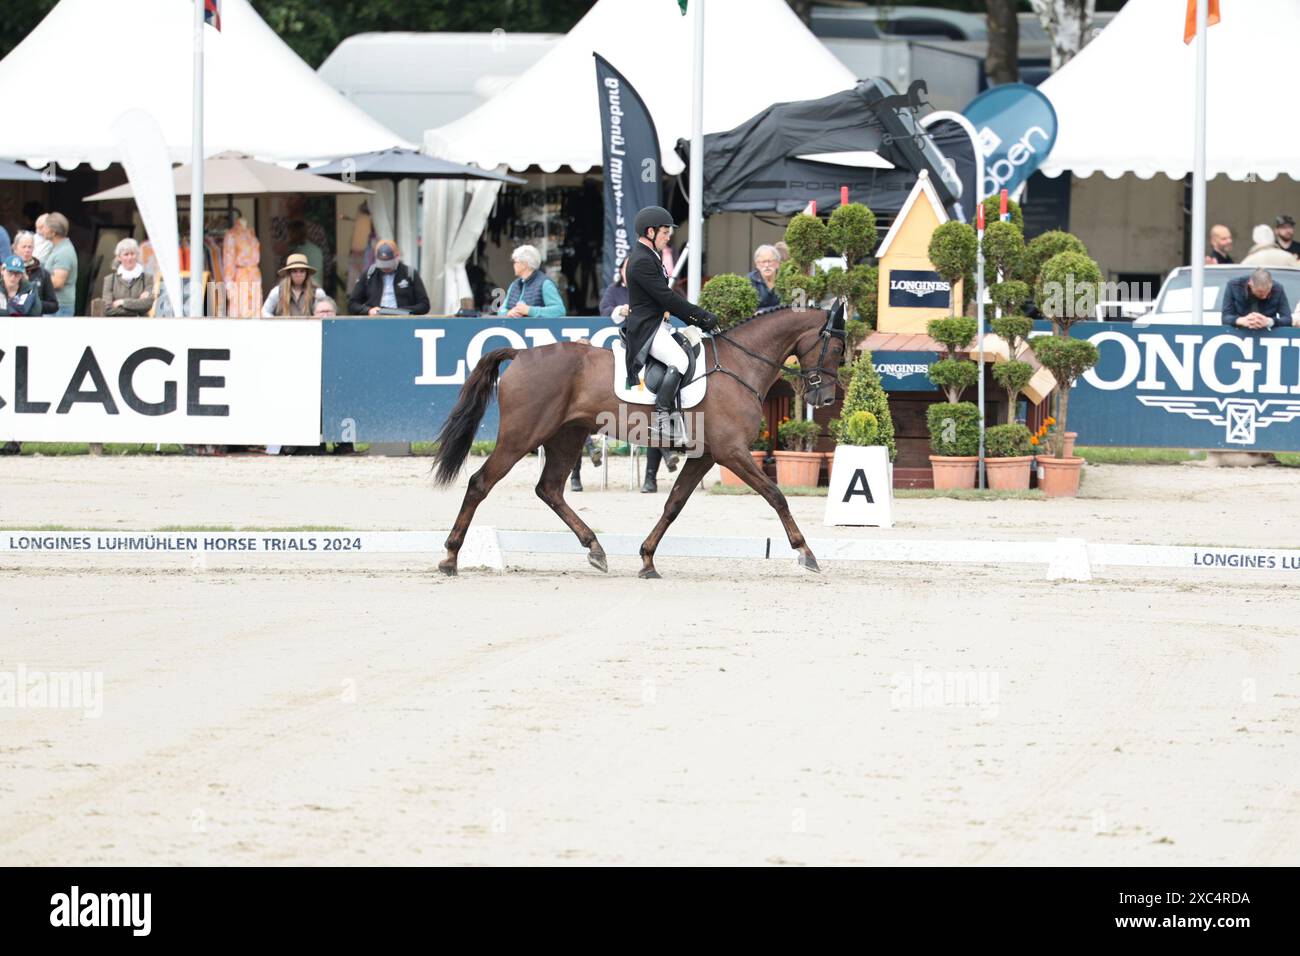 Patrick Whelan of Ireland with Ikoon Lan during the CCI5* dressage at the Longines Luhmuhlen Horse Trials on June 14, 2024, Luhmuhlen, Germany (Photo by Maxime David - MXIMD Pictures) Stock Photo